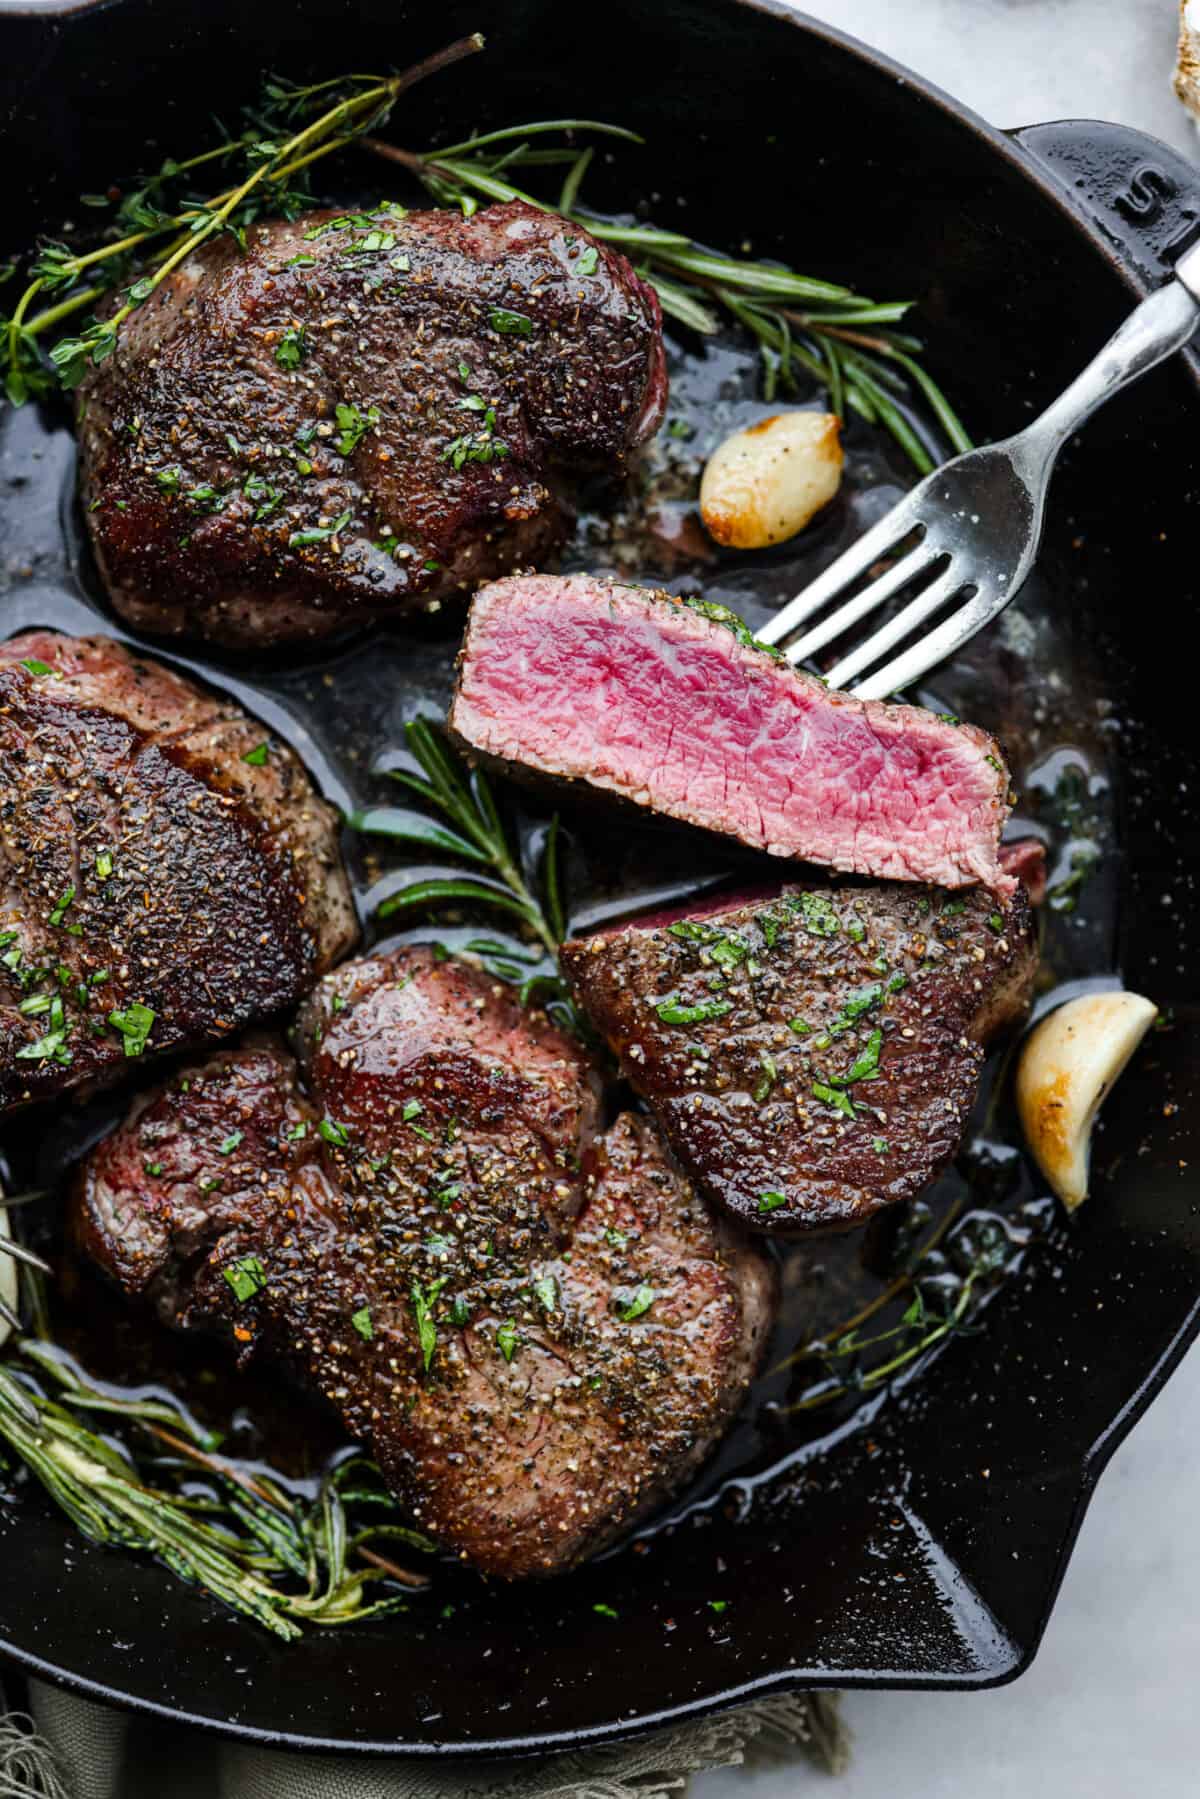 Top view of filet mignon in a black cast iron skillet with herbs and garlic.